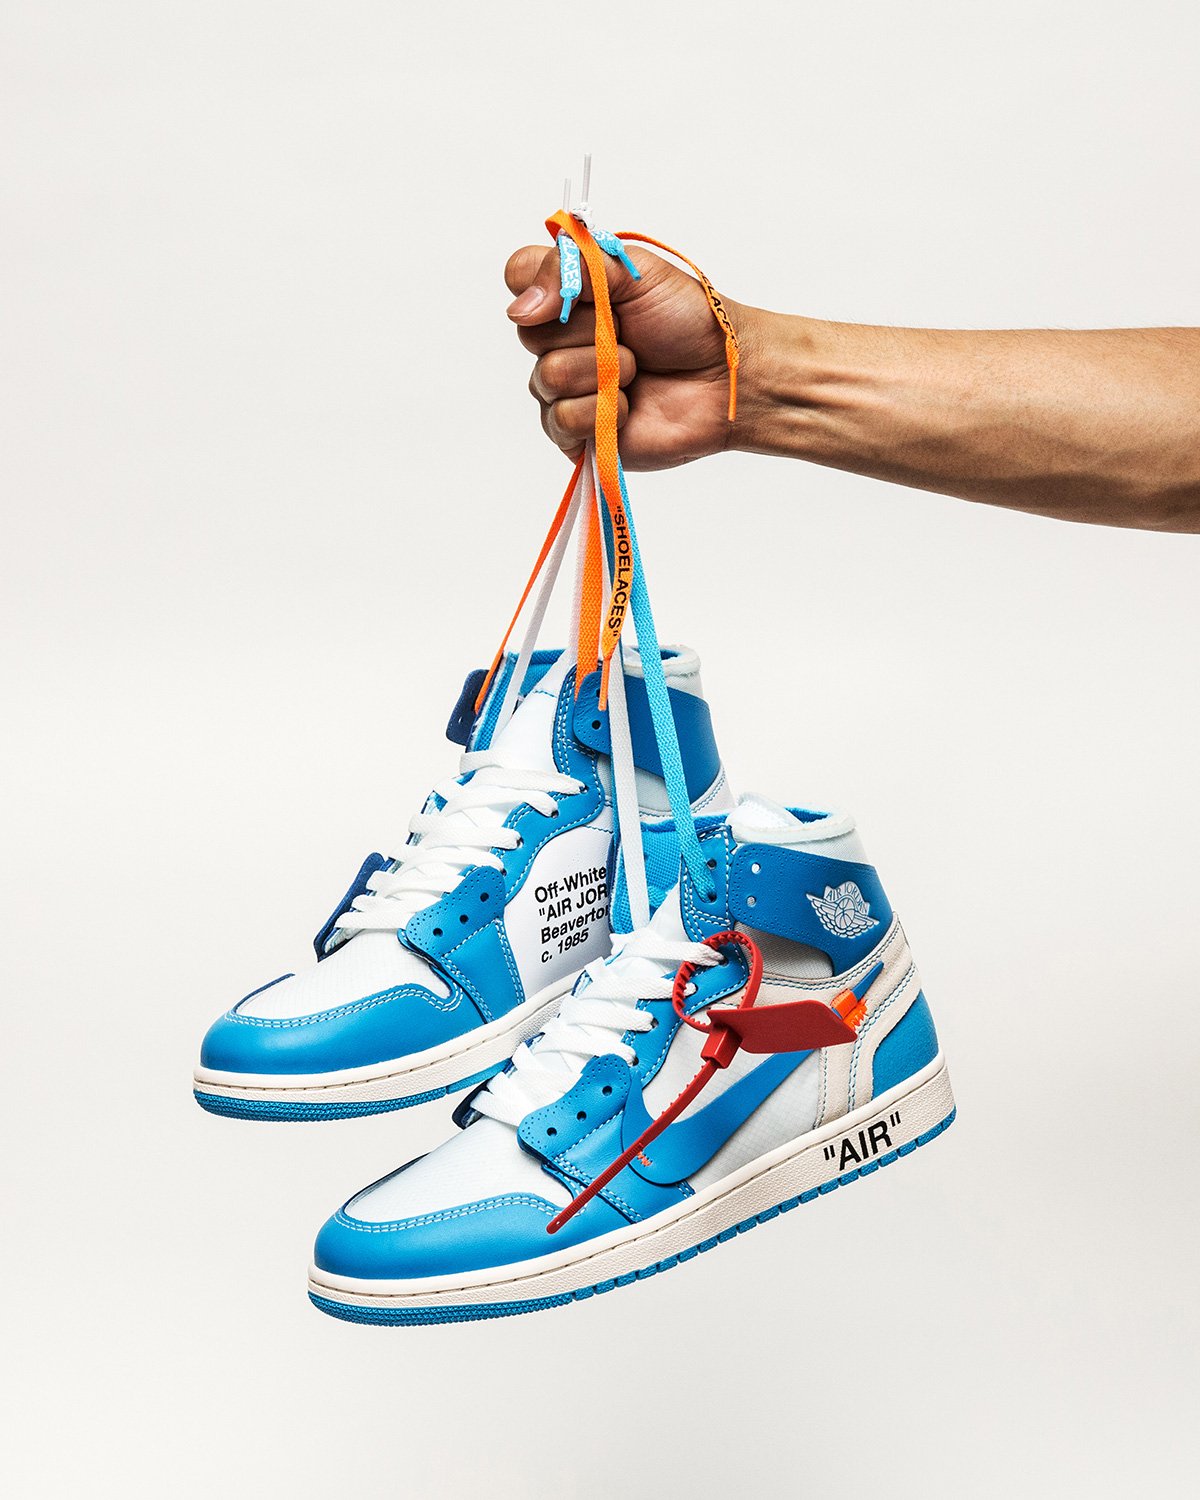 atmos USA on Twitter: "Off-White x Air Jordan 1 “UNC” raffle is now live.  This shoe releases June 19th in-store to raffle winners. Enter |  https://t.co/TyMWL6wpvM https://t.co/GpoPdMSydF" / Twitter